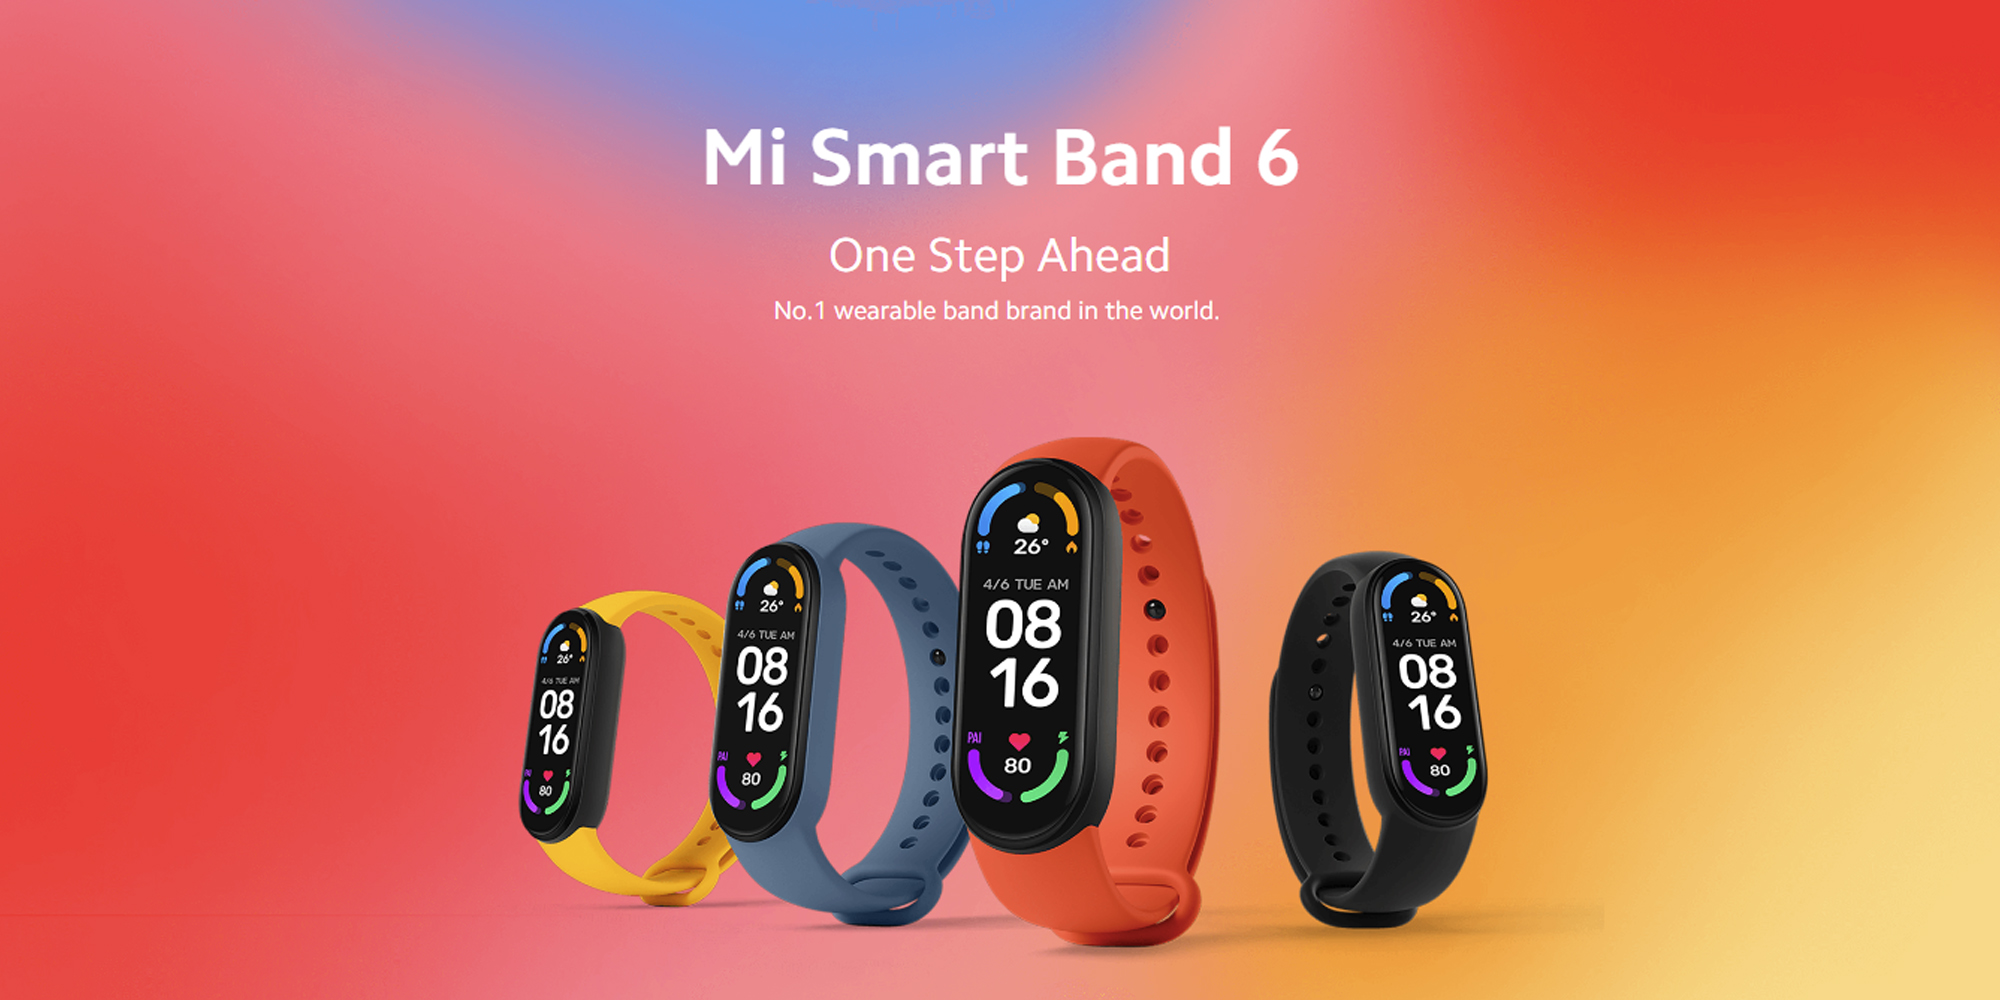 Xiaomi Mi Smart Band 6: Sports Smart Bracelet Black with 1.56" AMOLED Display, 30 Sports Modes, Heart Rate Monitor, Sleep Tracker, 14 Days of Battery Life